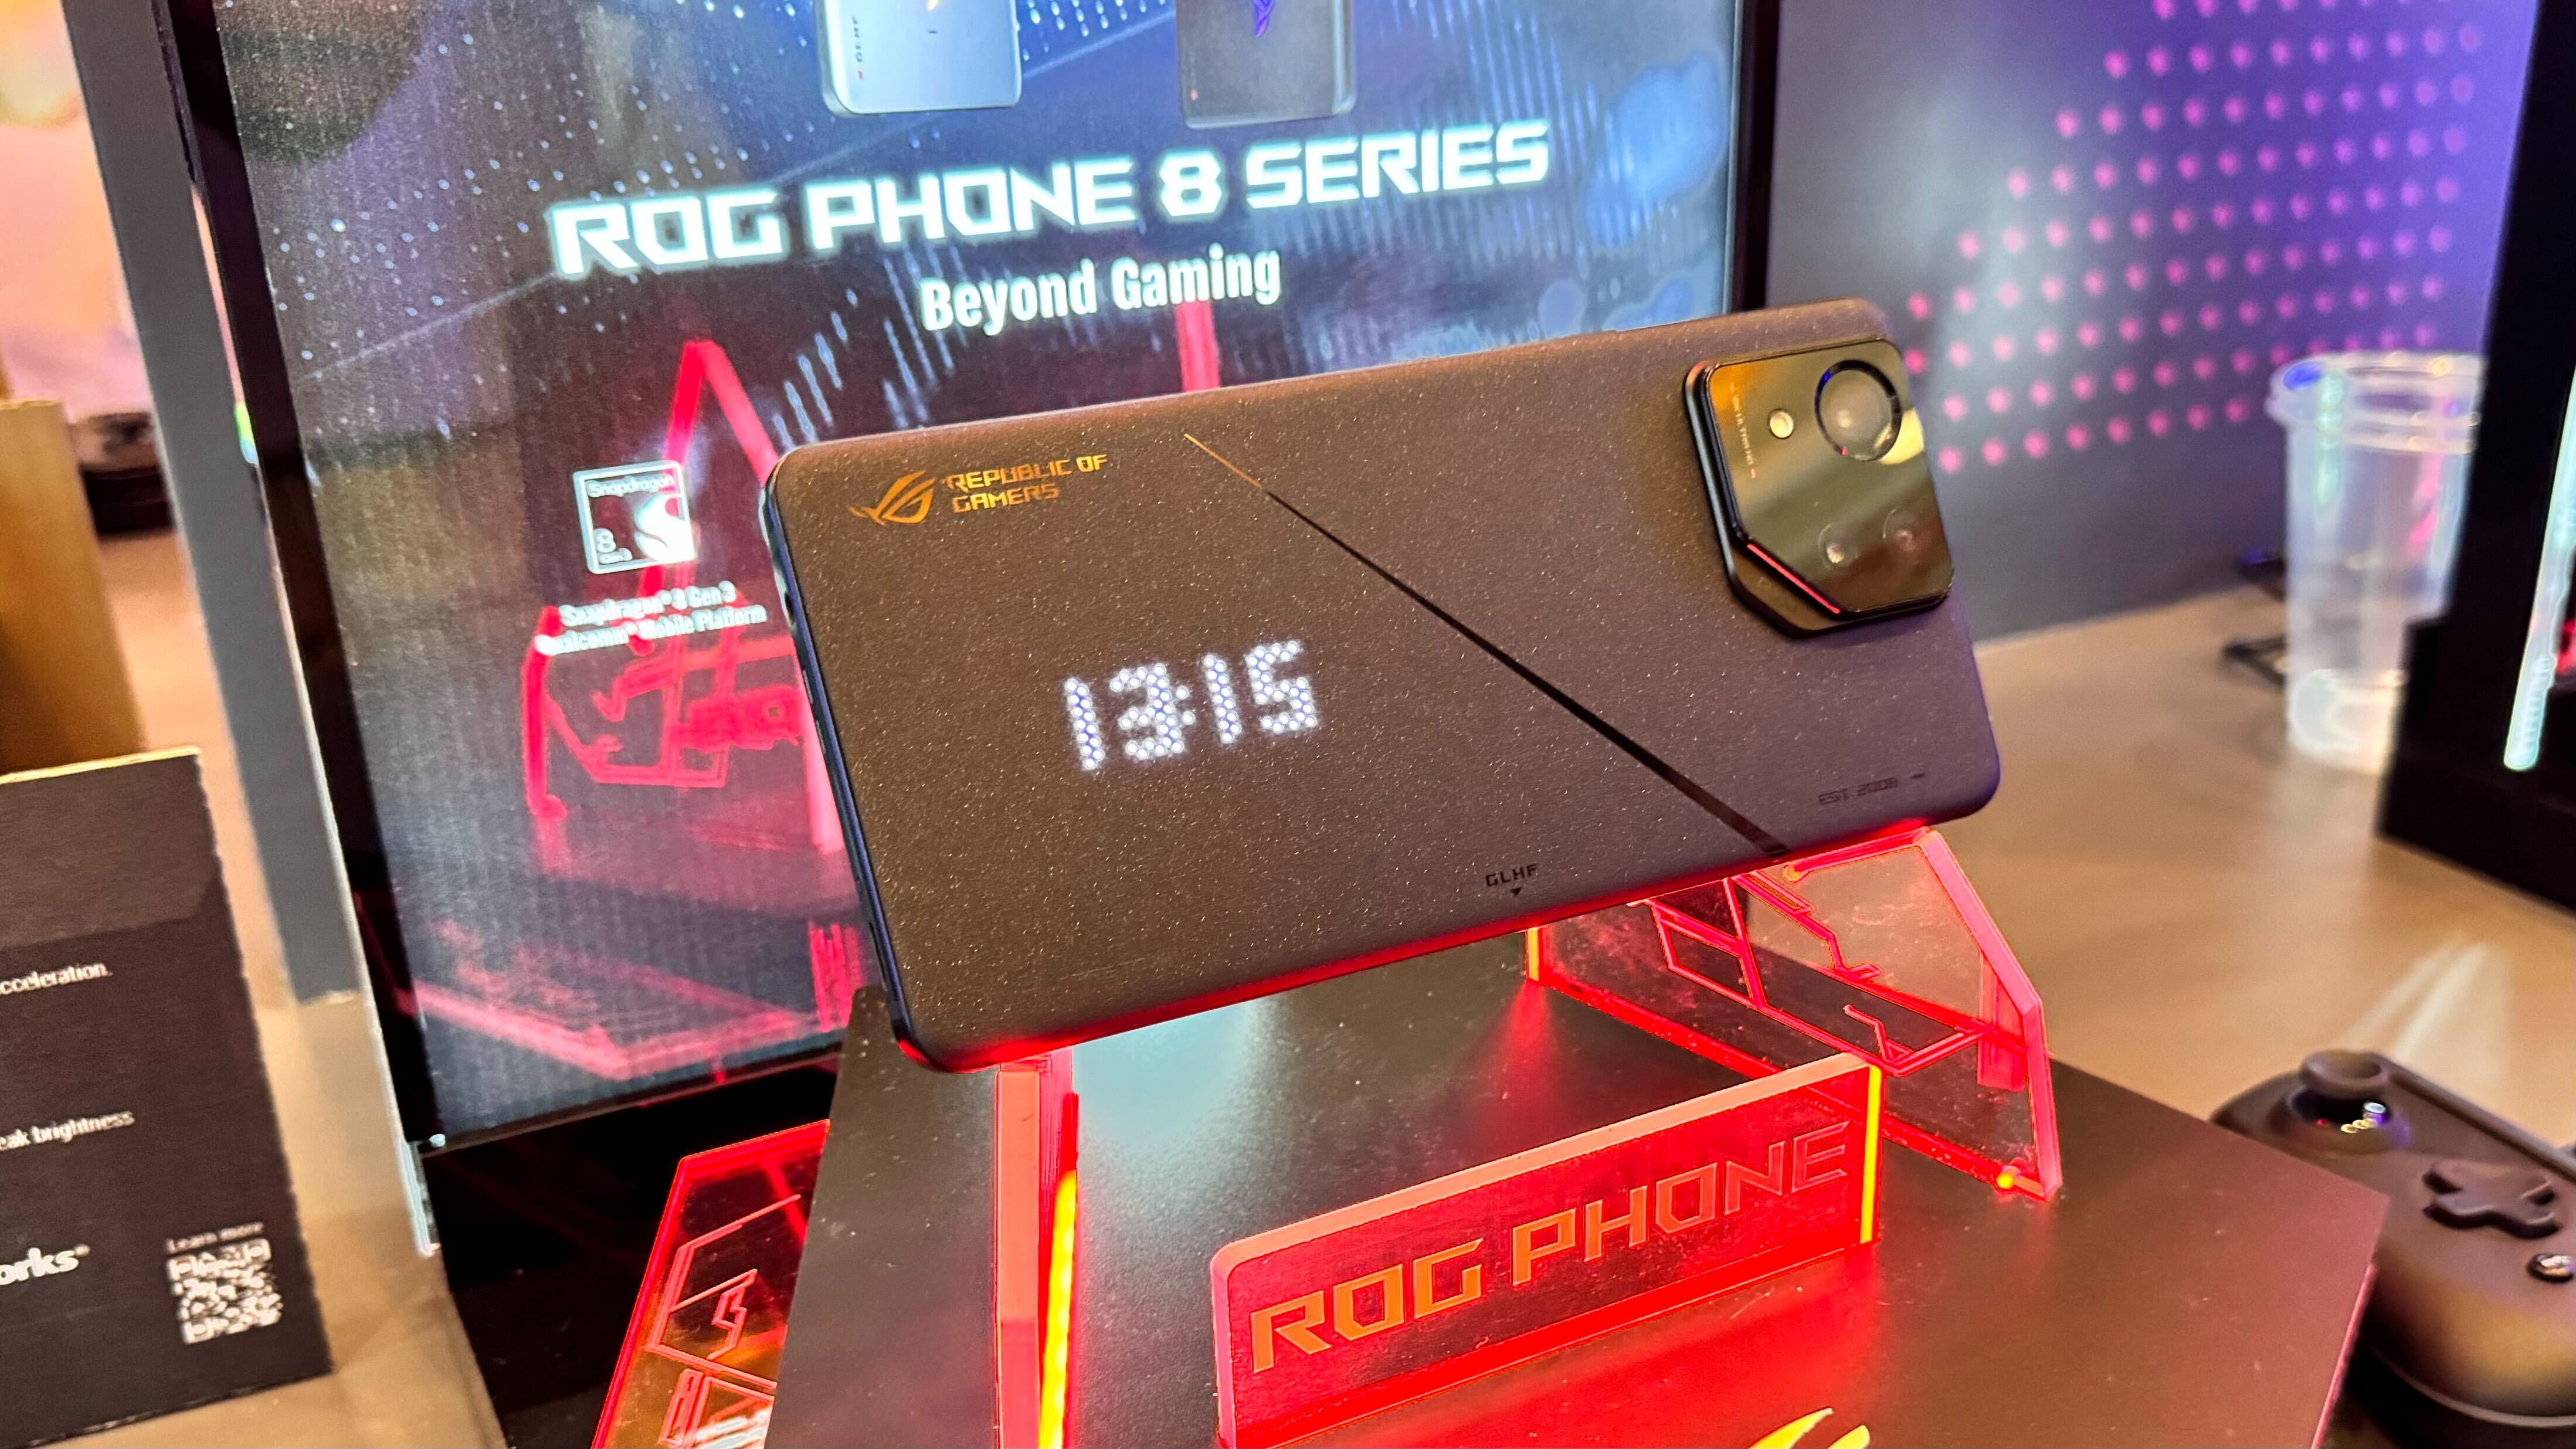 New Renders Of Asus ROG Phone 8 Pro Provide 360-Degree View In Latest Leak  - Tech